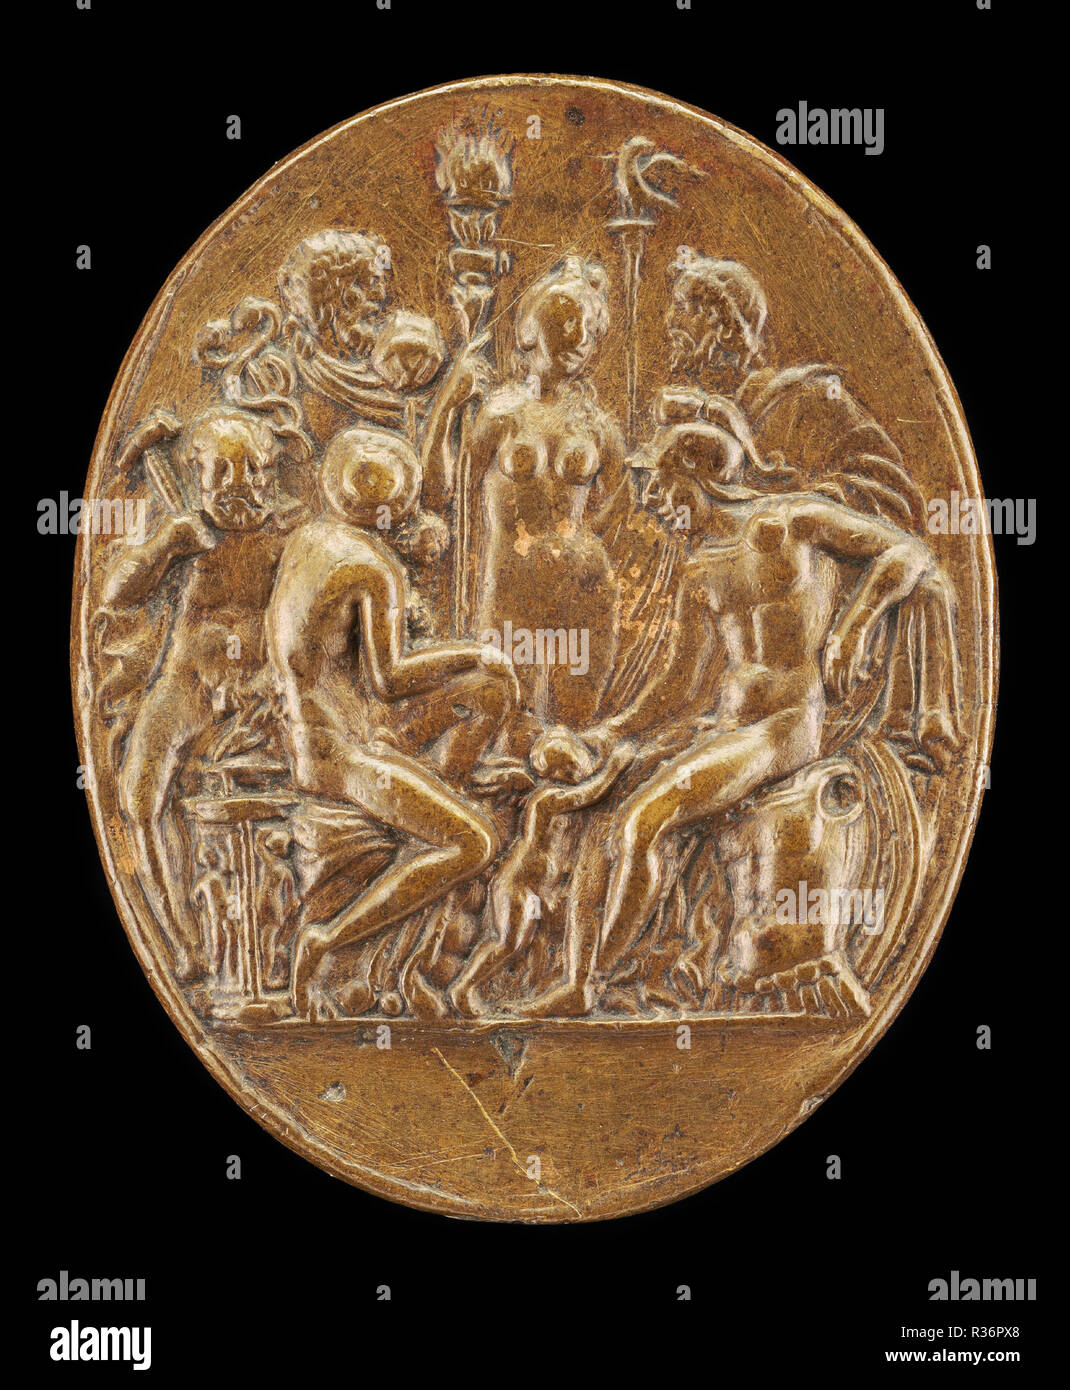 Assembly of Gods. Dated: second half 15th century. Dimensions: overall (oval): 4.2 x 3.4 cm (1 5/8 x 1 5/16 in.) gross weight: 22 gr. Medium: bronze. Museum: National Gallery of Art, Washington DC. Author: Attributed to Master IO. F. F. Stock Photo